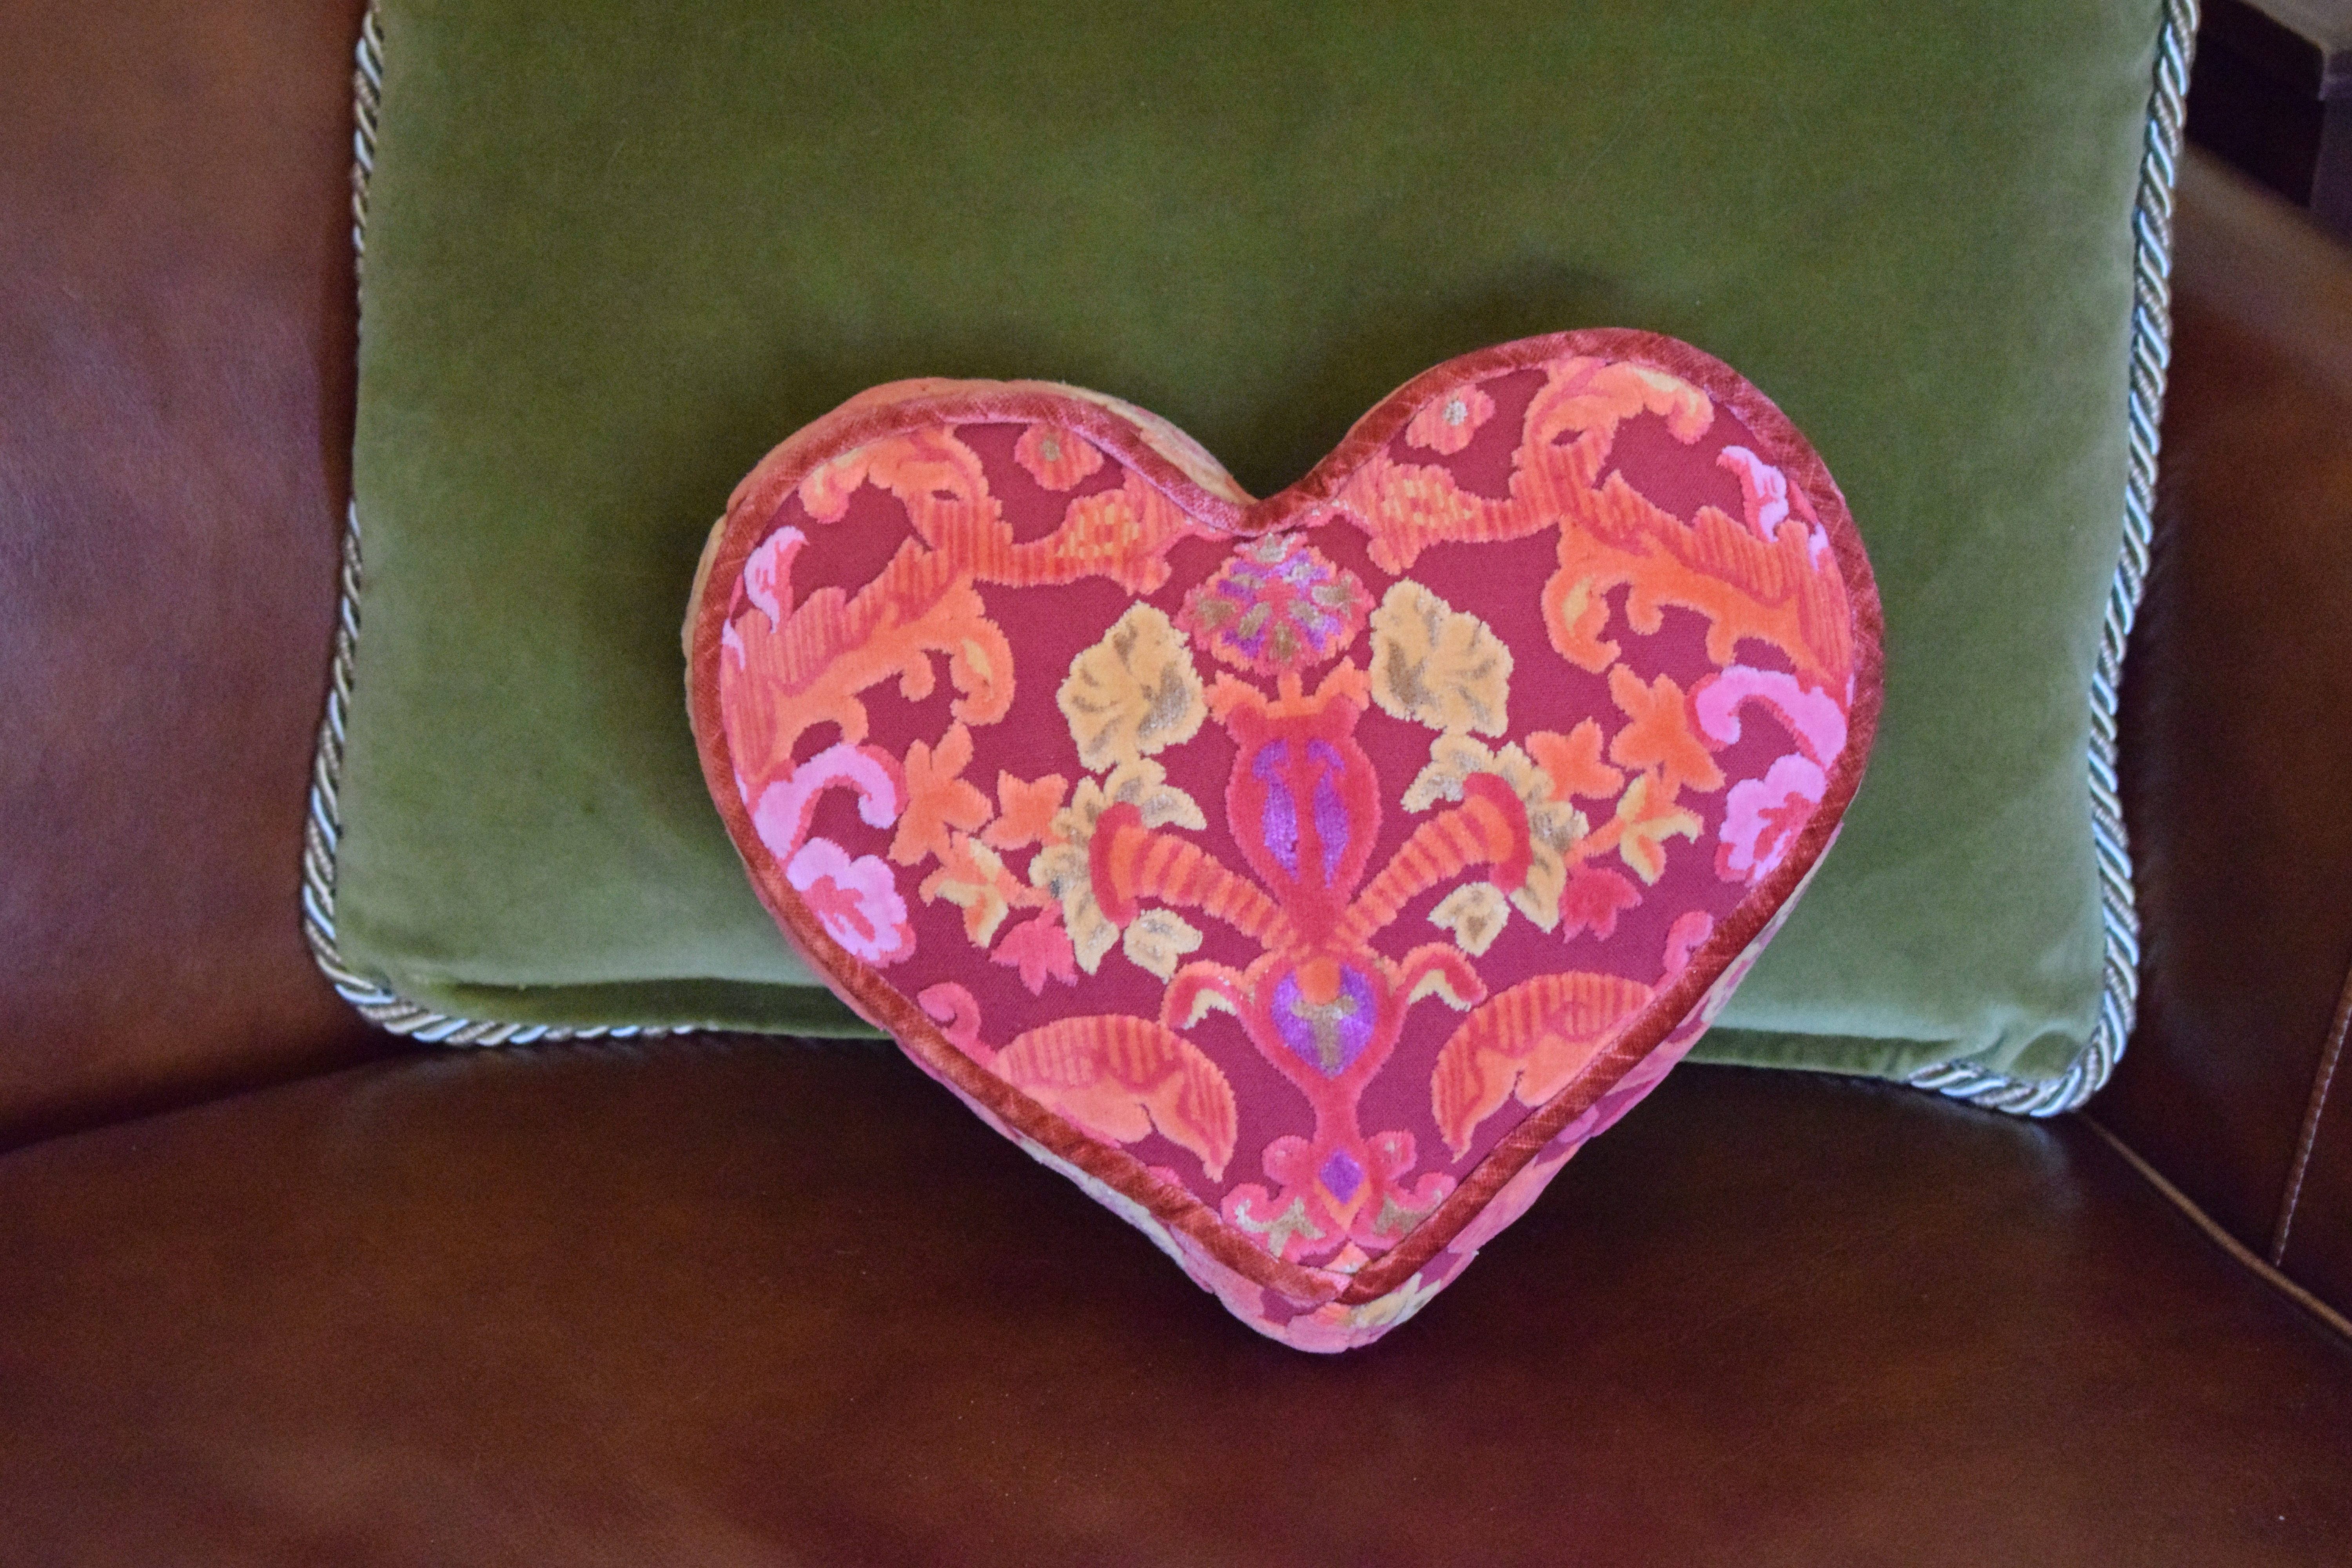 Heart Pillow made by Sylvie Farrington, owner of Sylvie's Bags of Martha's Vineyard, It's the weekend! Number 37